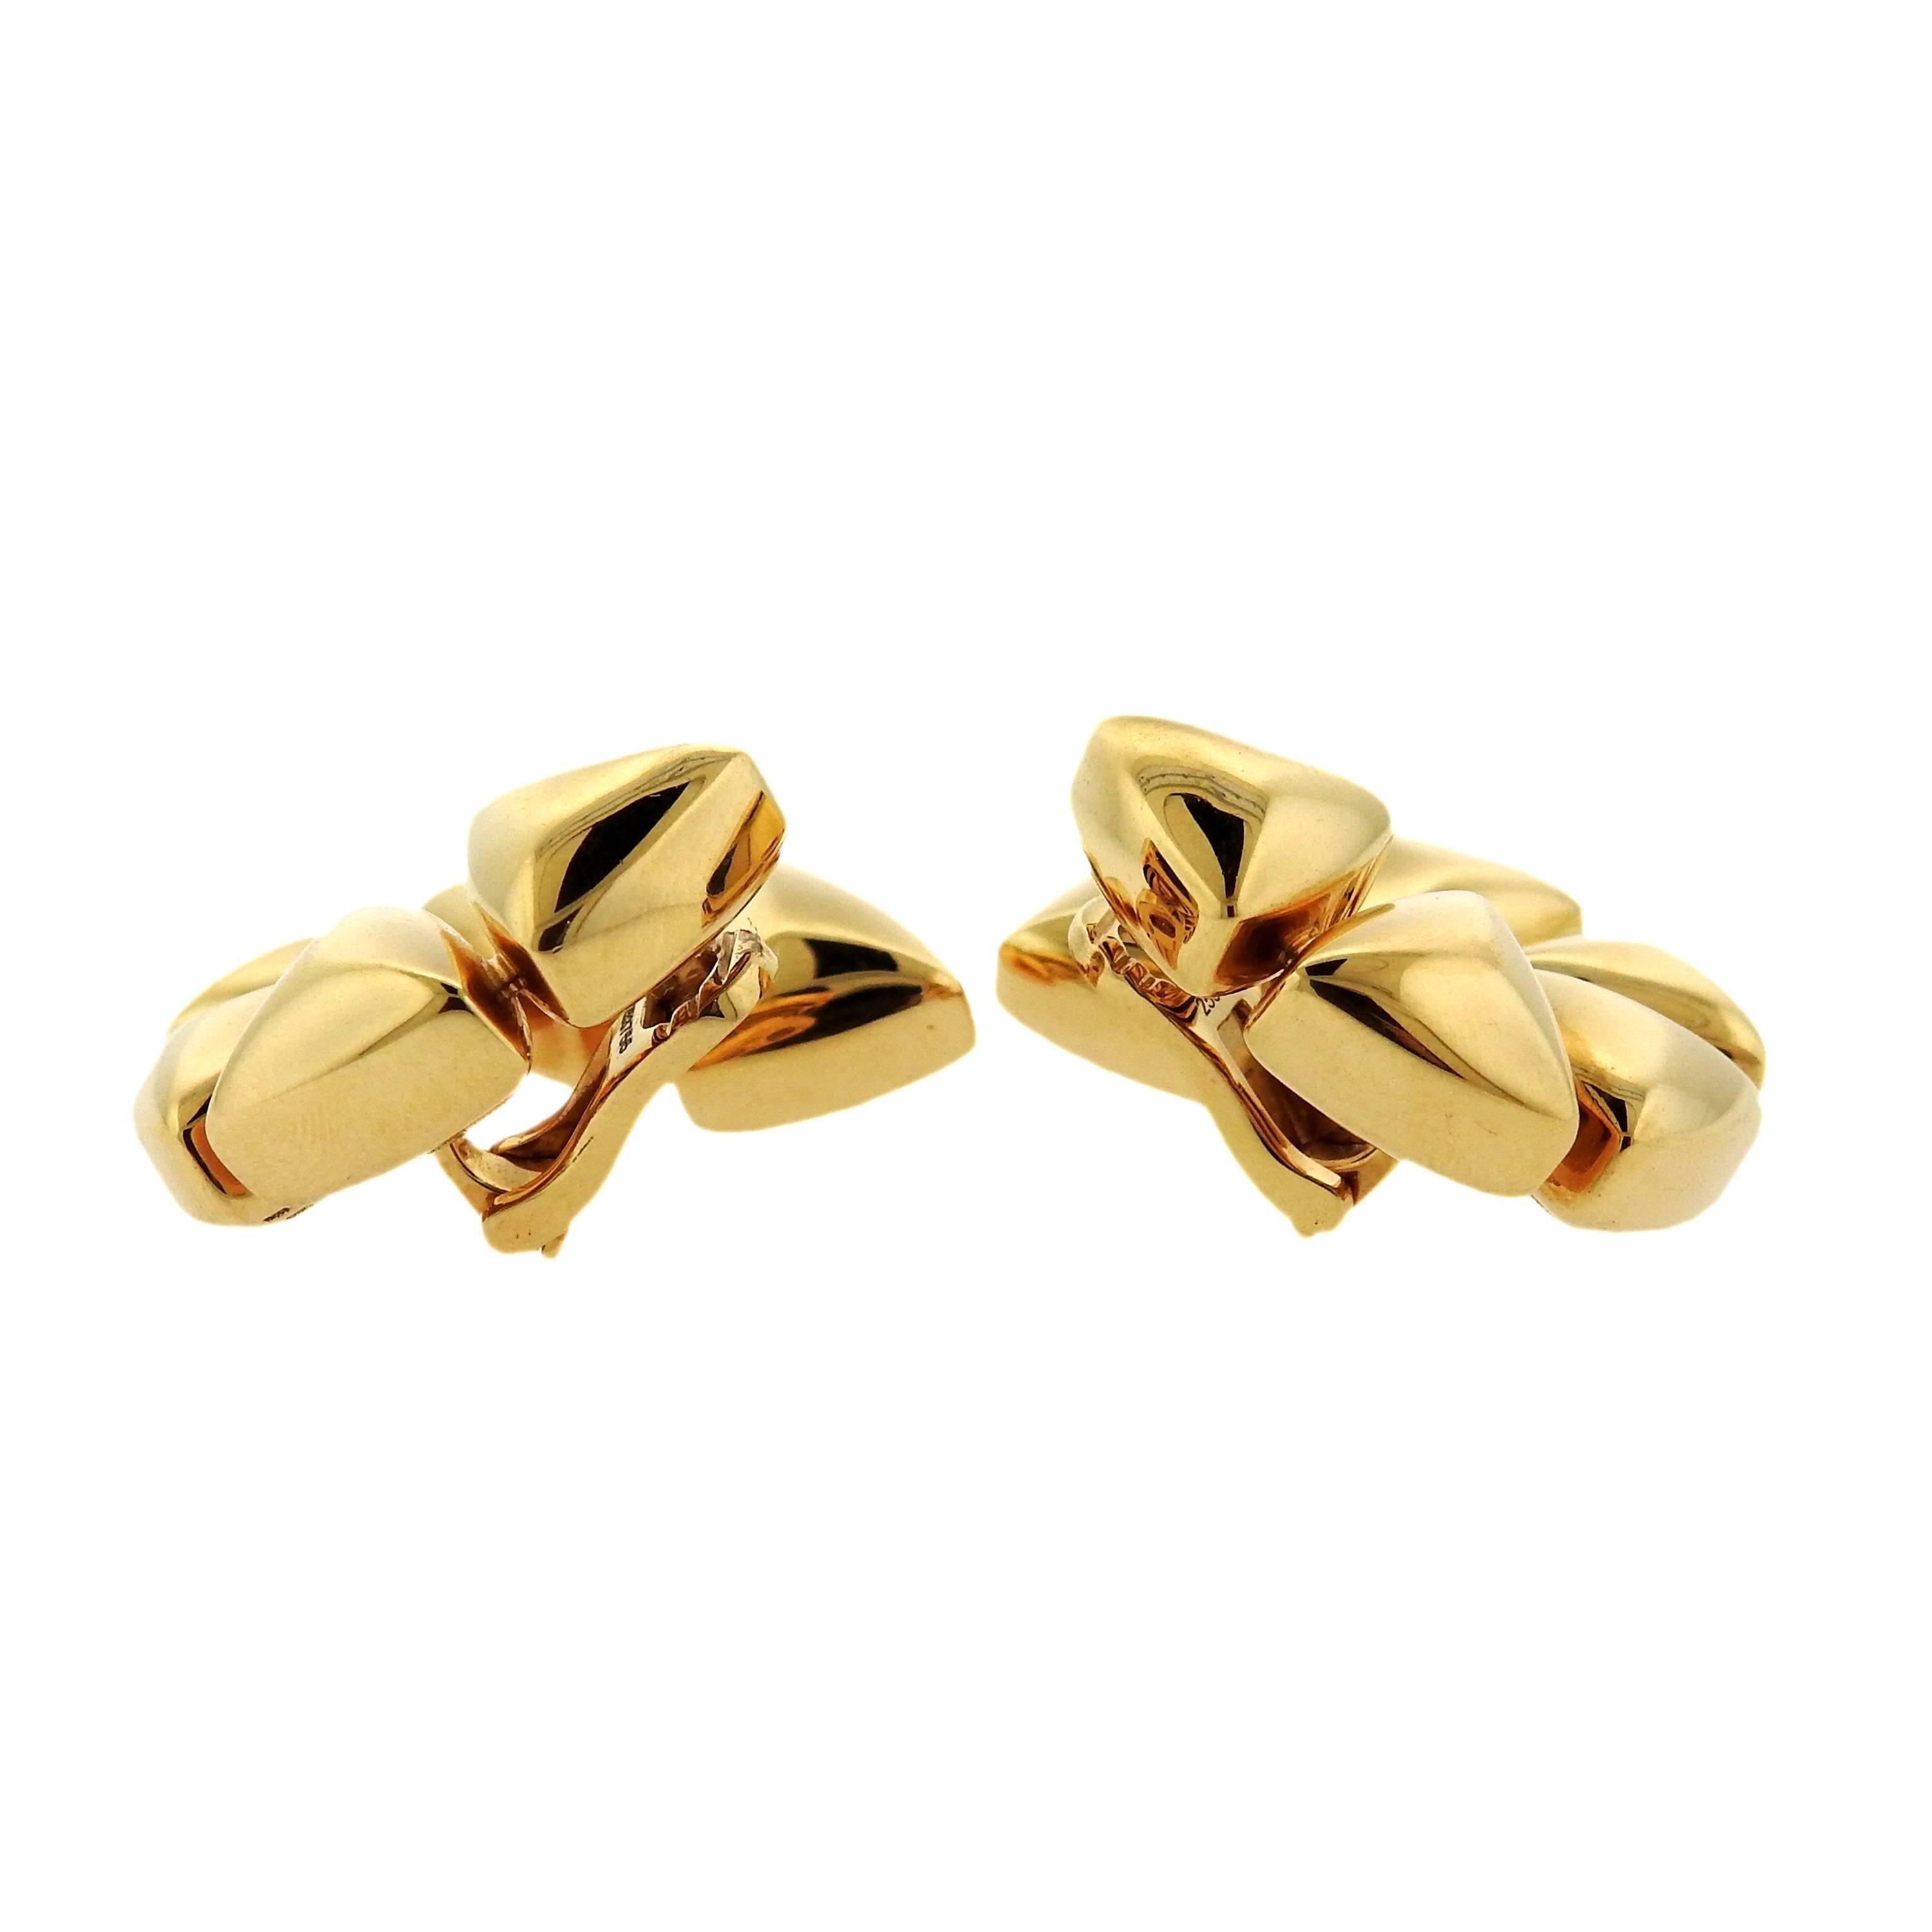 Pair of 18k gold earrings, crafted by Vhernier for Freccia collection. Earrings measure 32mm x 30mm. Marked: Vhernier, 750, 30W. Weight - 24.2 grams. Retail $8000